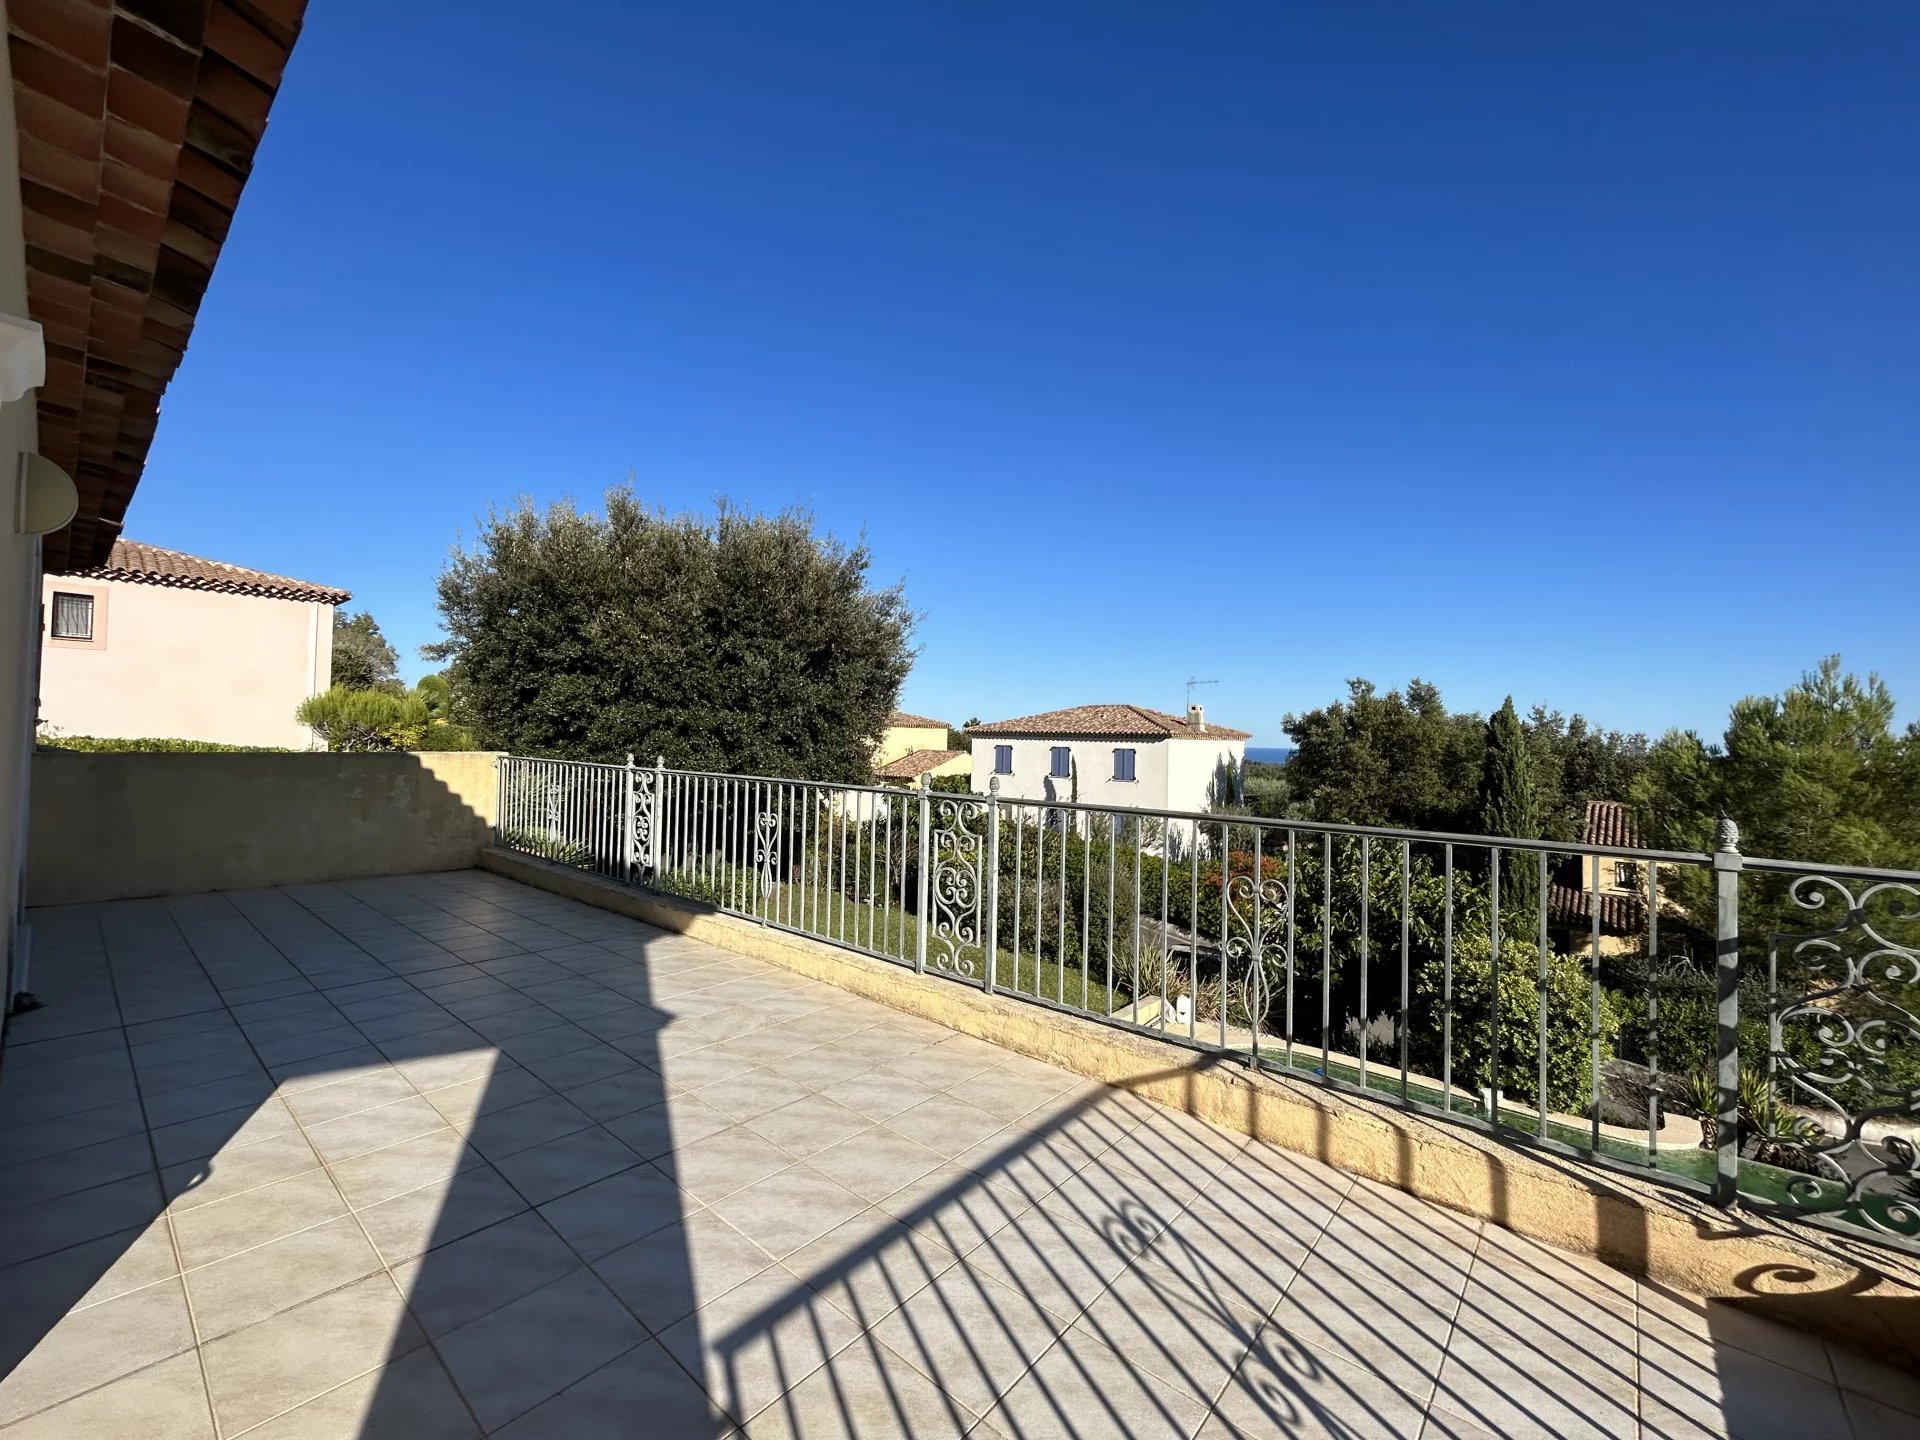 Biot: Very beautiful 4 bedroom villa with infinity pool 1000m2 of land